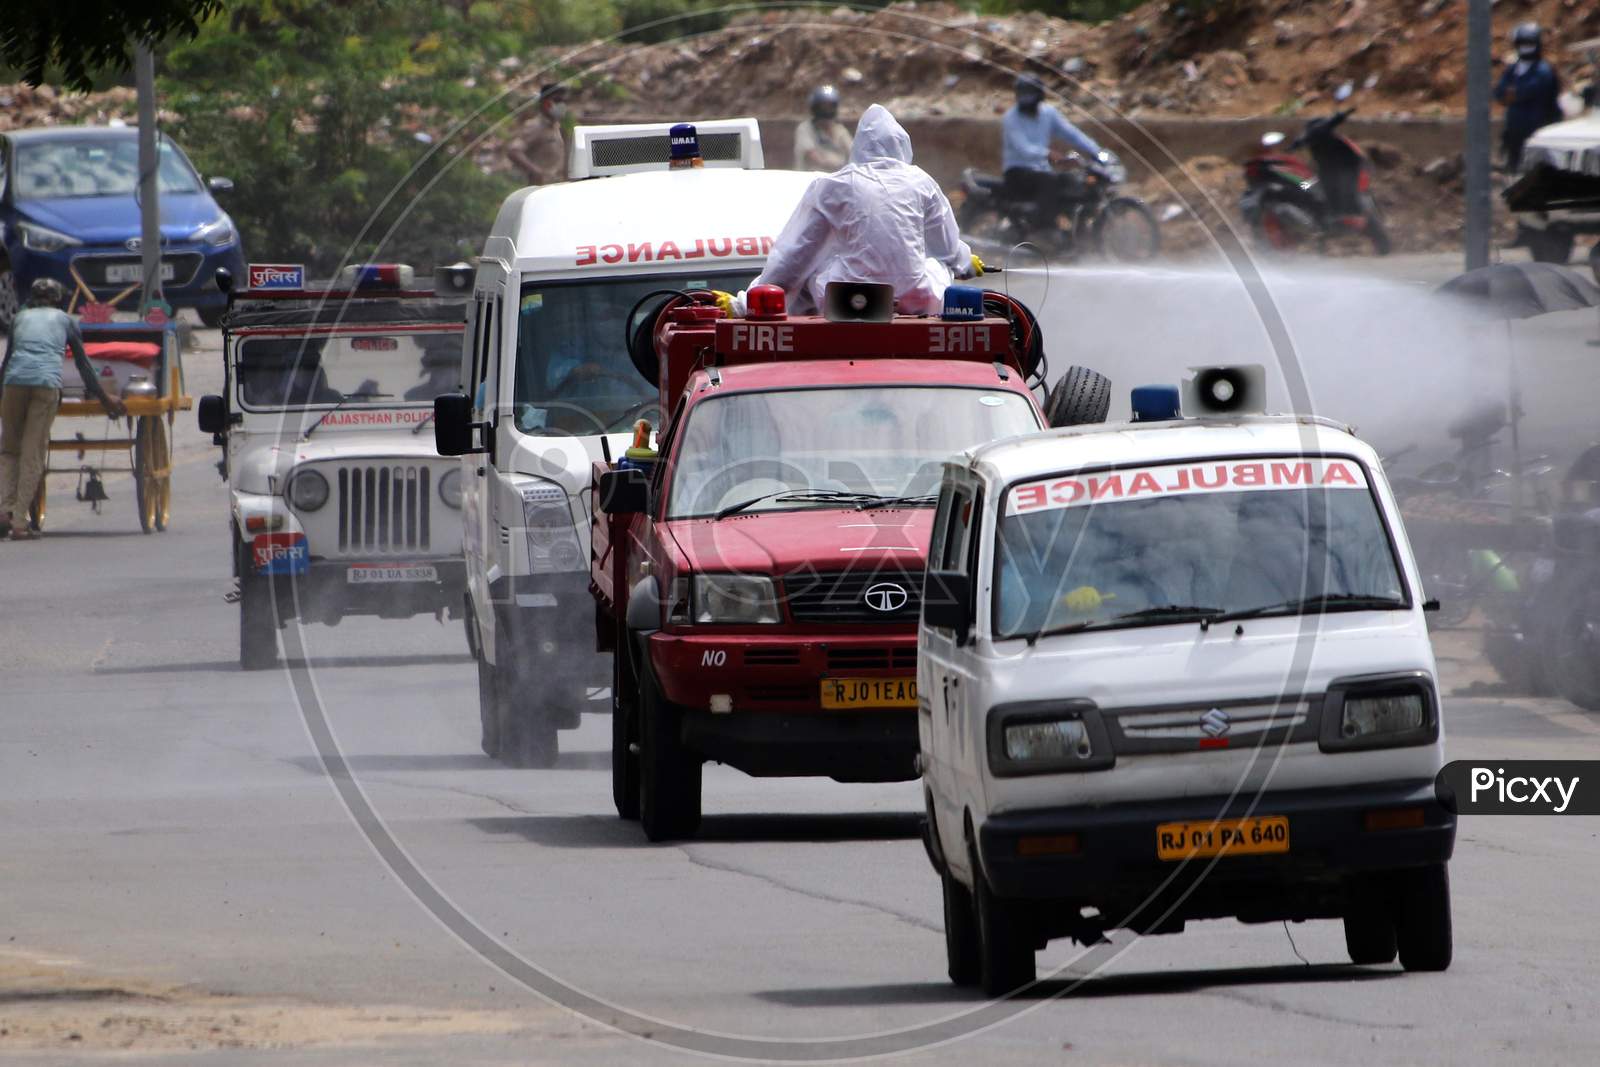 Health workers carry the dead body a person who died of coronavirus infection for cremation in an ambulance in Ajmer, Rajasthan on July 08, 2020